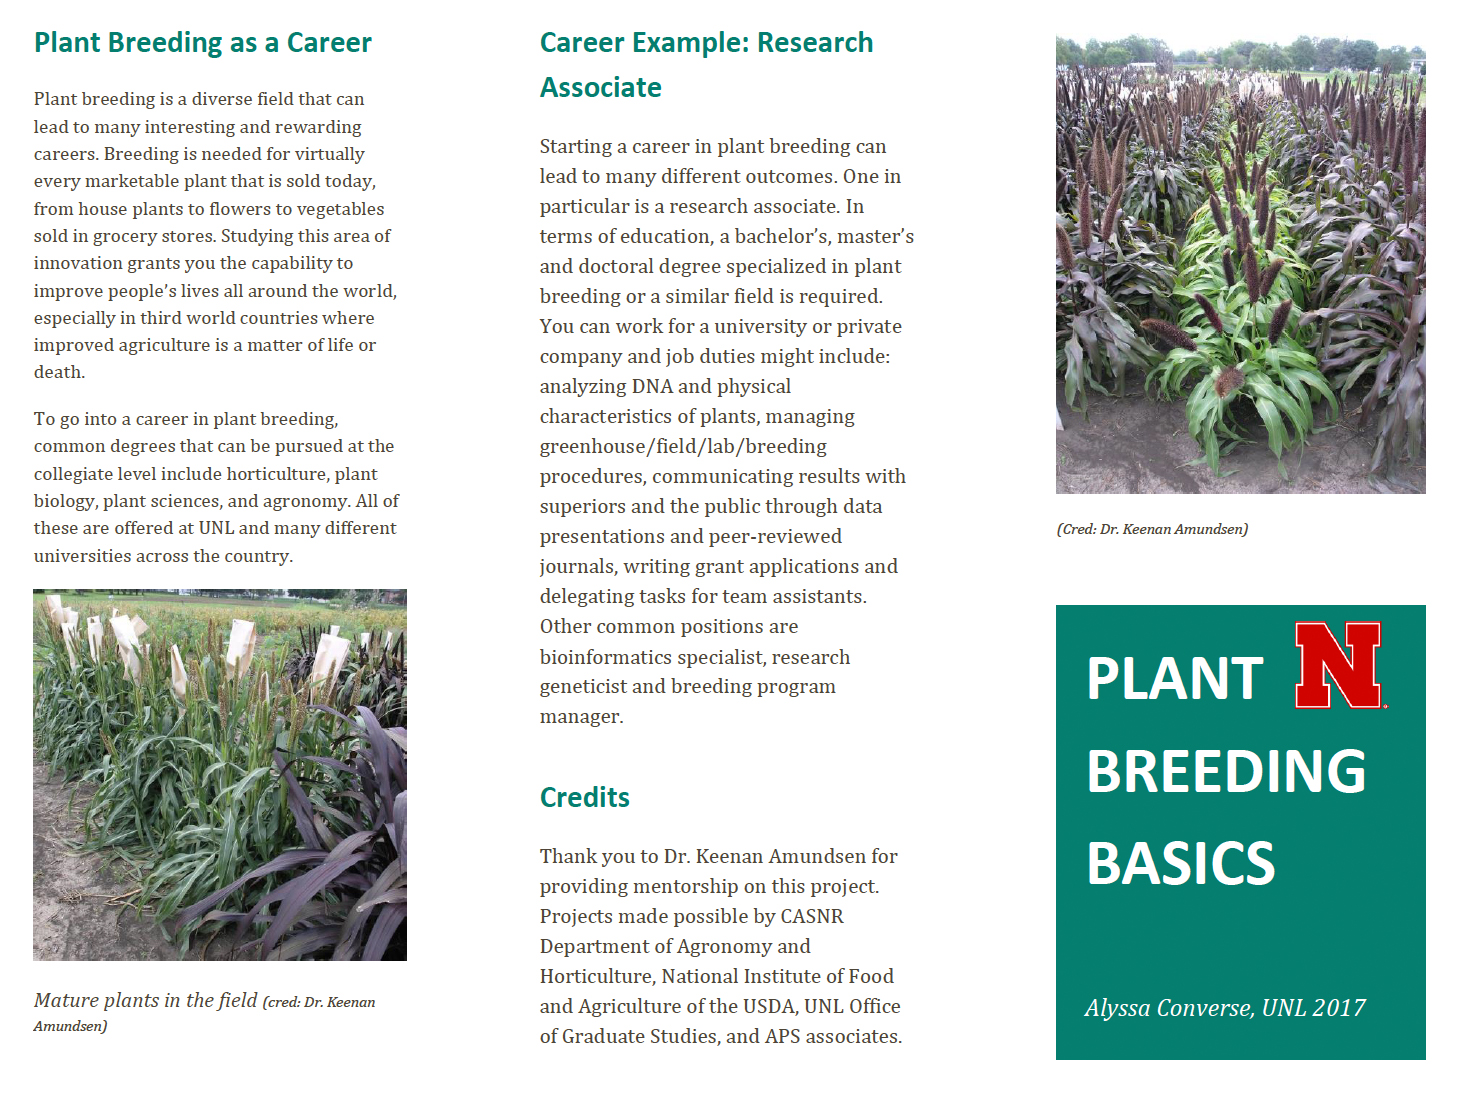 What is plant breeding? poster